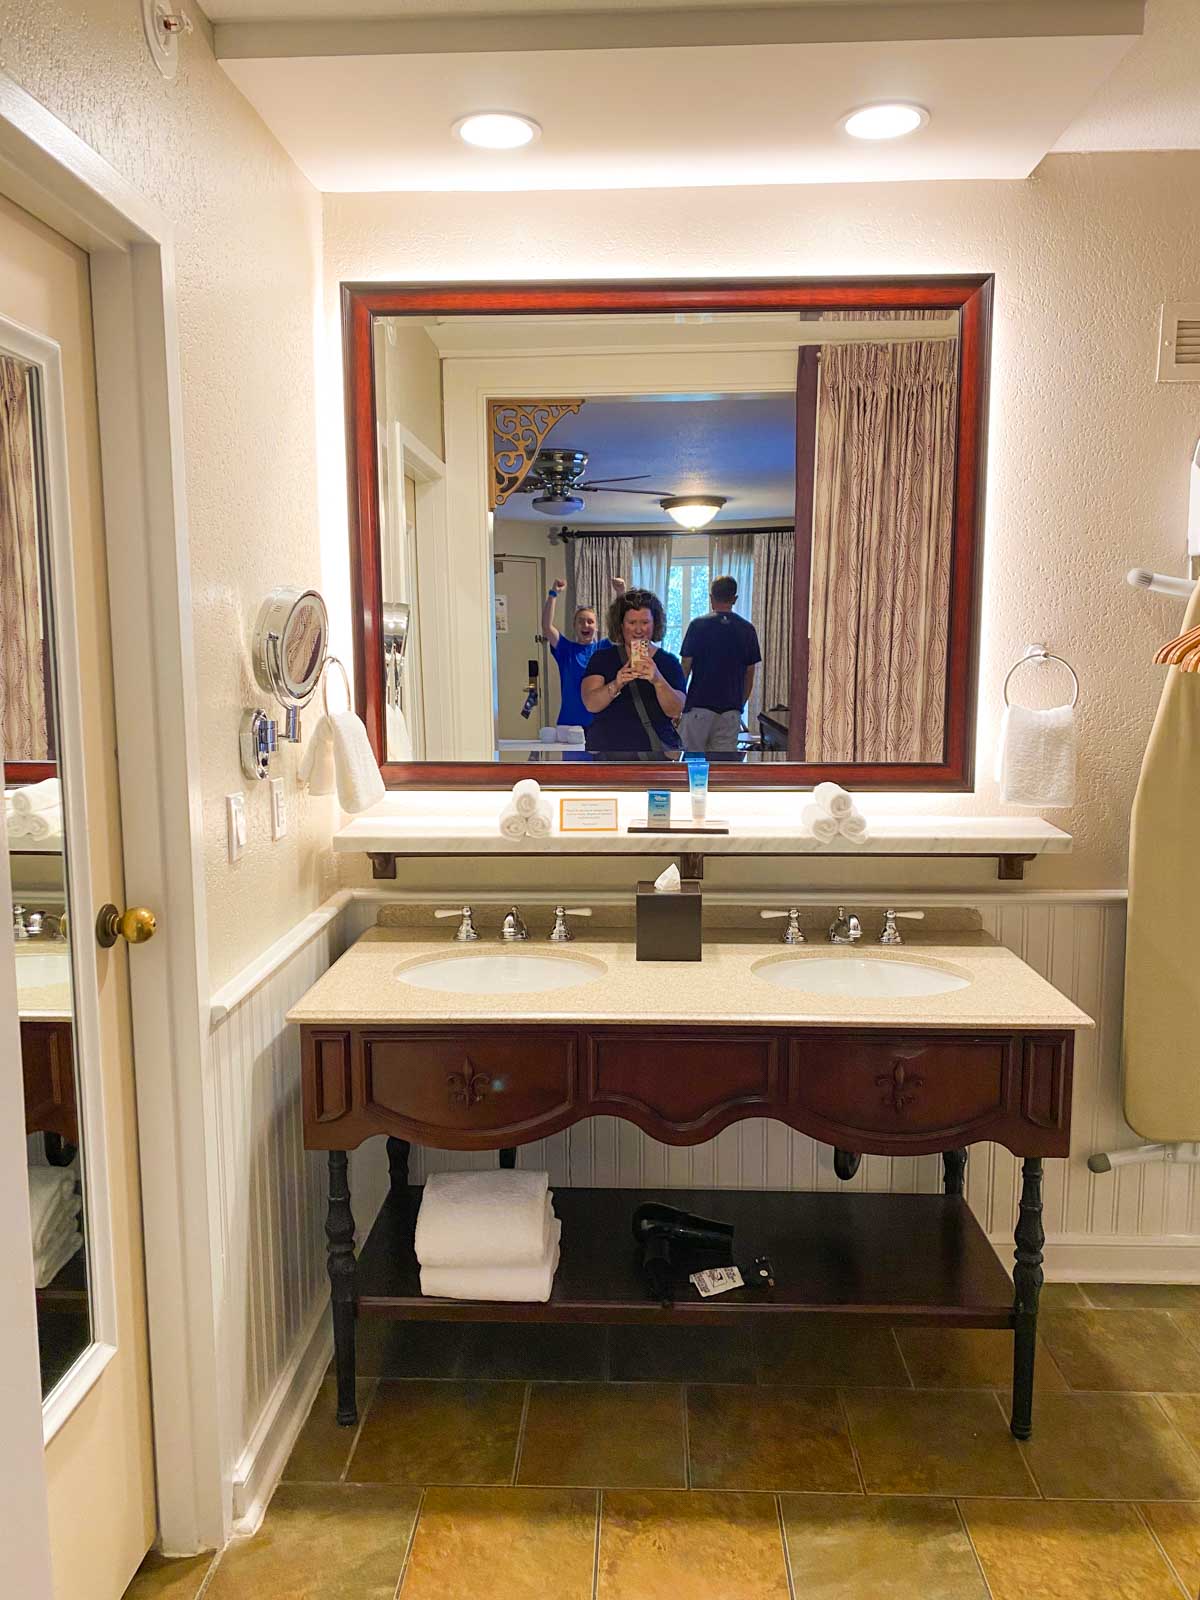 The bathroom vanity section of the guest room inside the hotel.